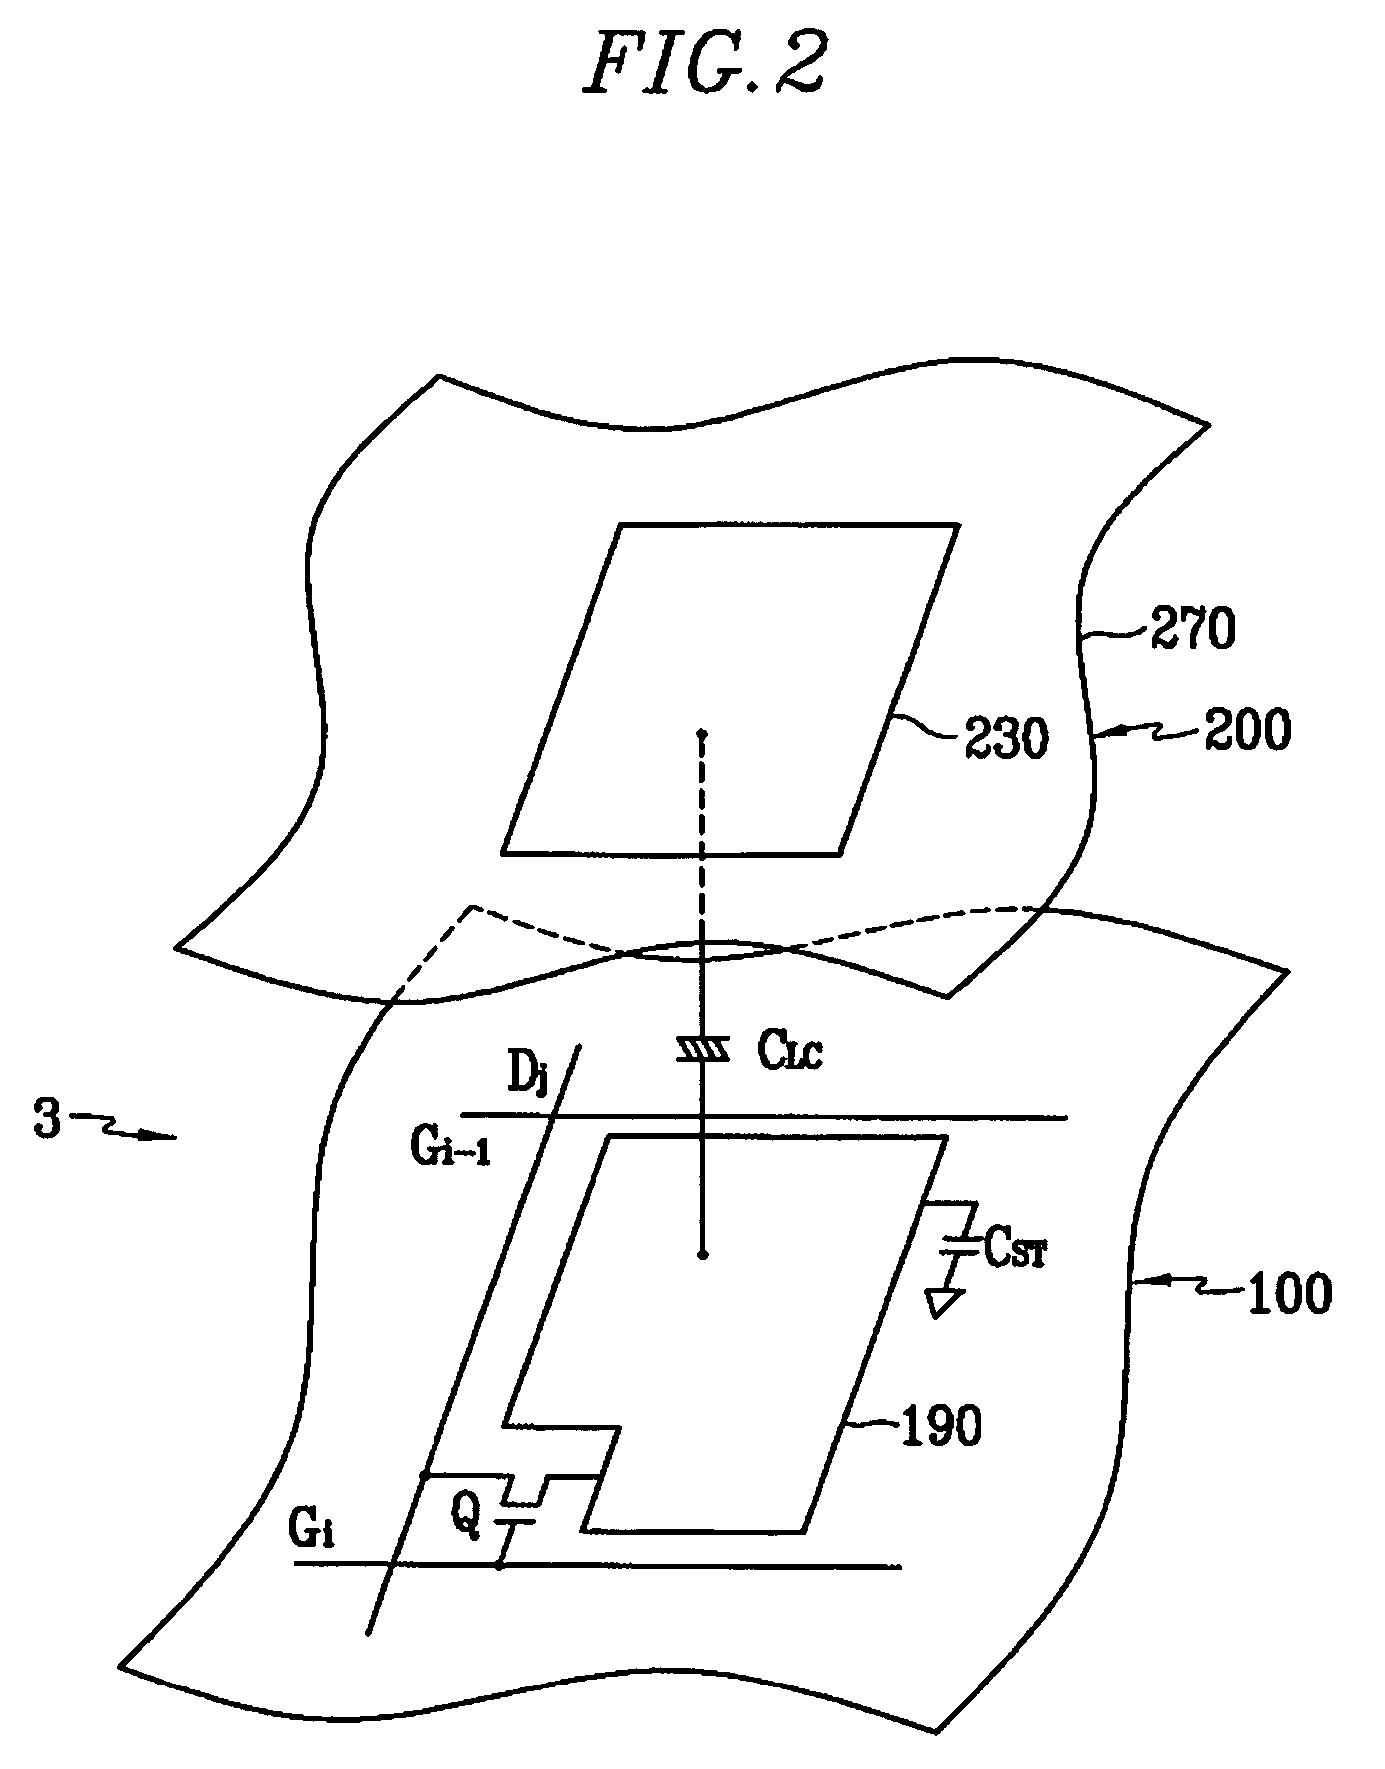 Four-color liquid crystal display with various reflective and transmissive areas